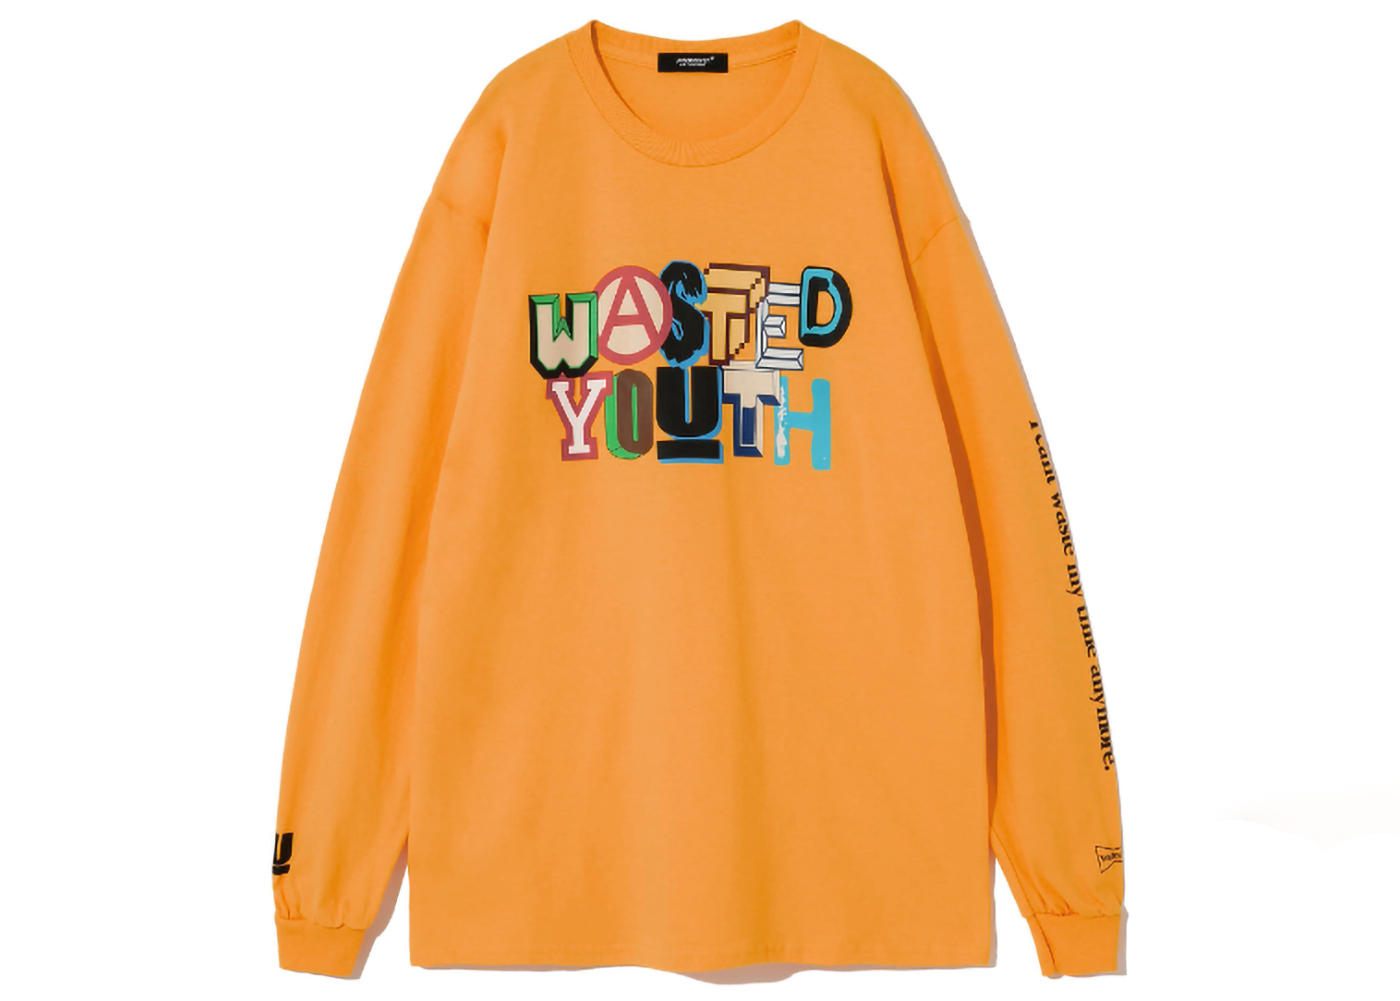 Undercover x Verdy Wasted Youth L/S T-Shirt White Men's - SS23 - US